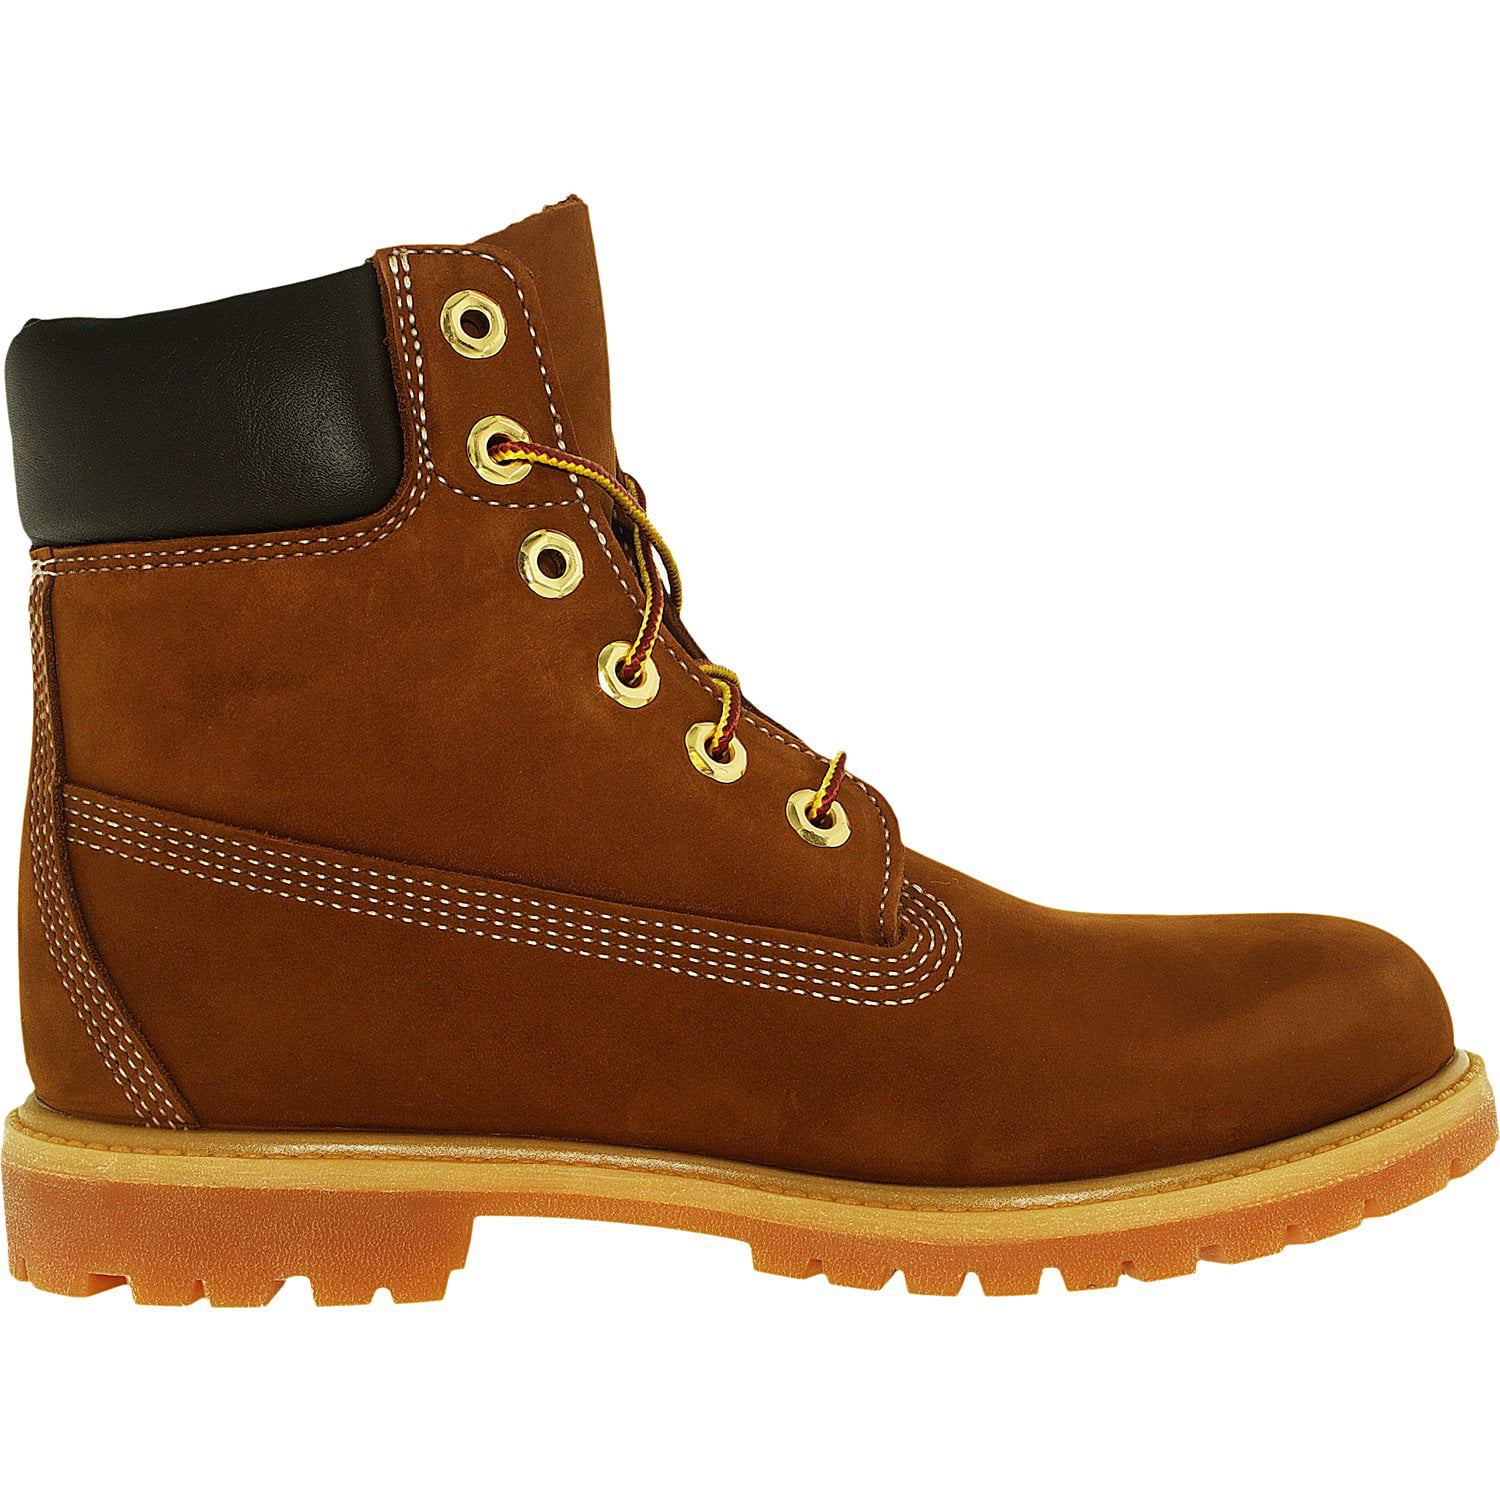 Timberland Women's 6 Inch Premium Boot Leather Rust Brown High-Top Boot ...